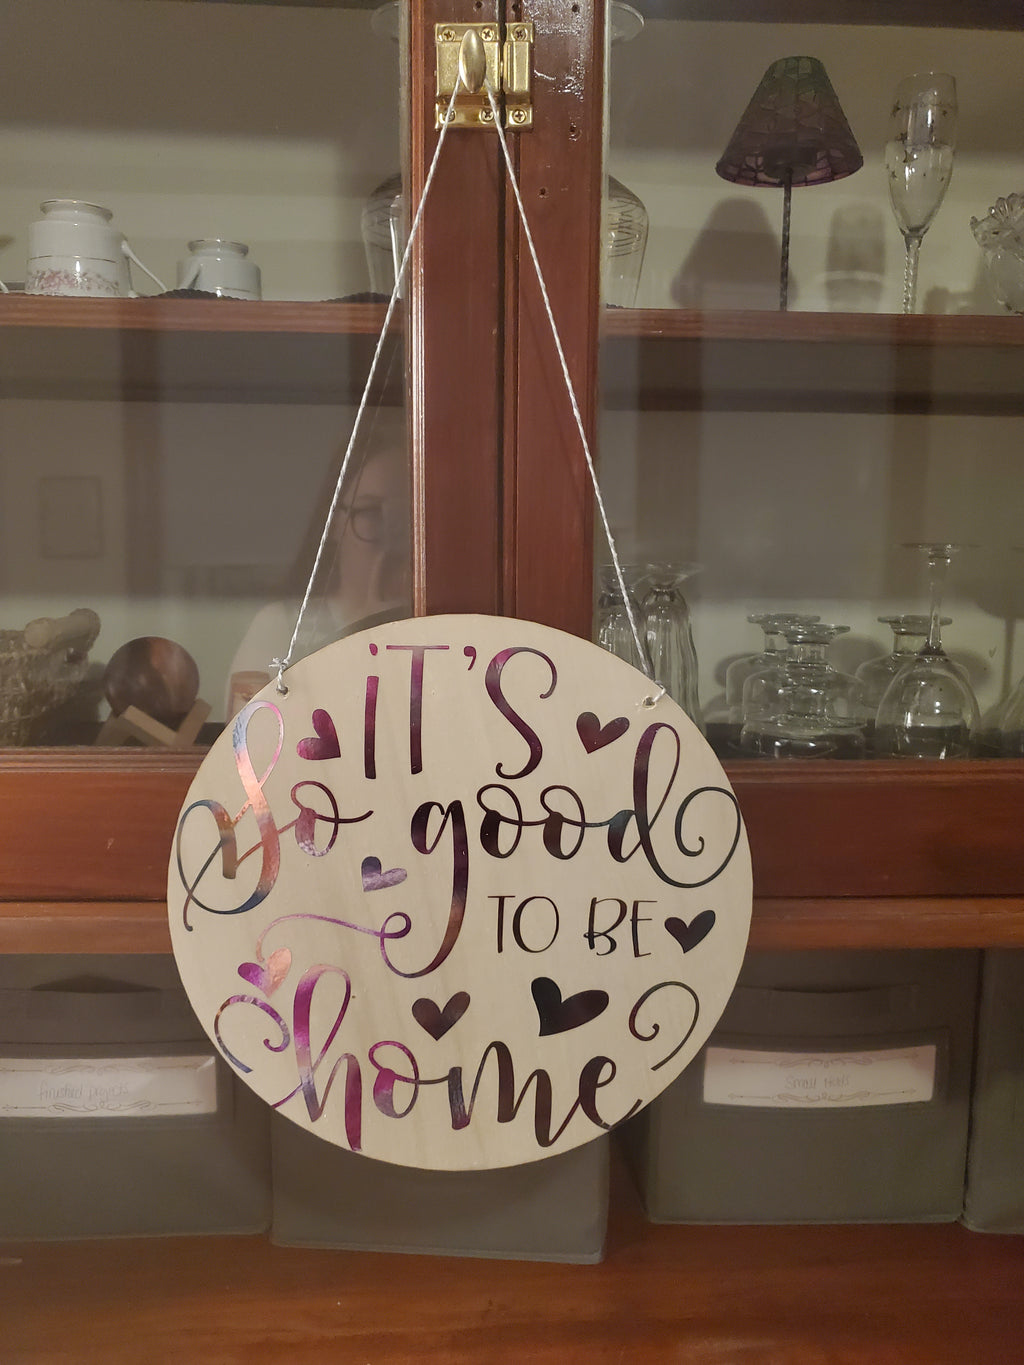 Handmade 12 inch round metallic sign "It's Good to be Home"